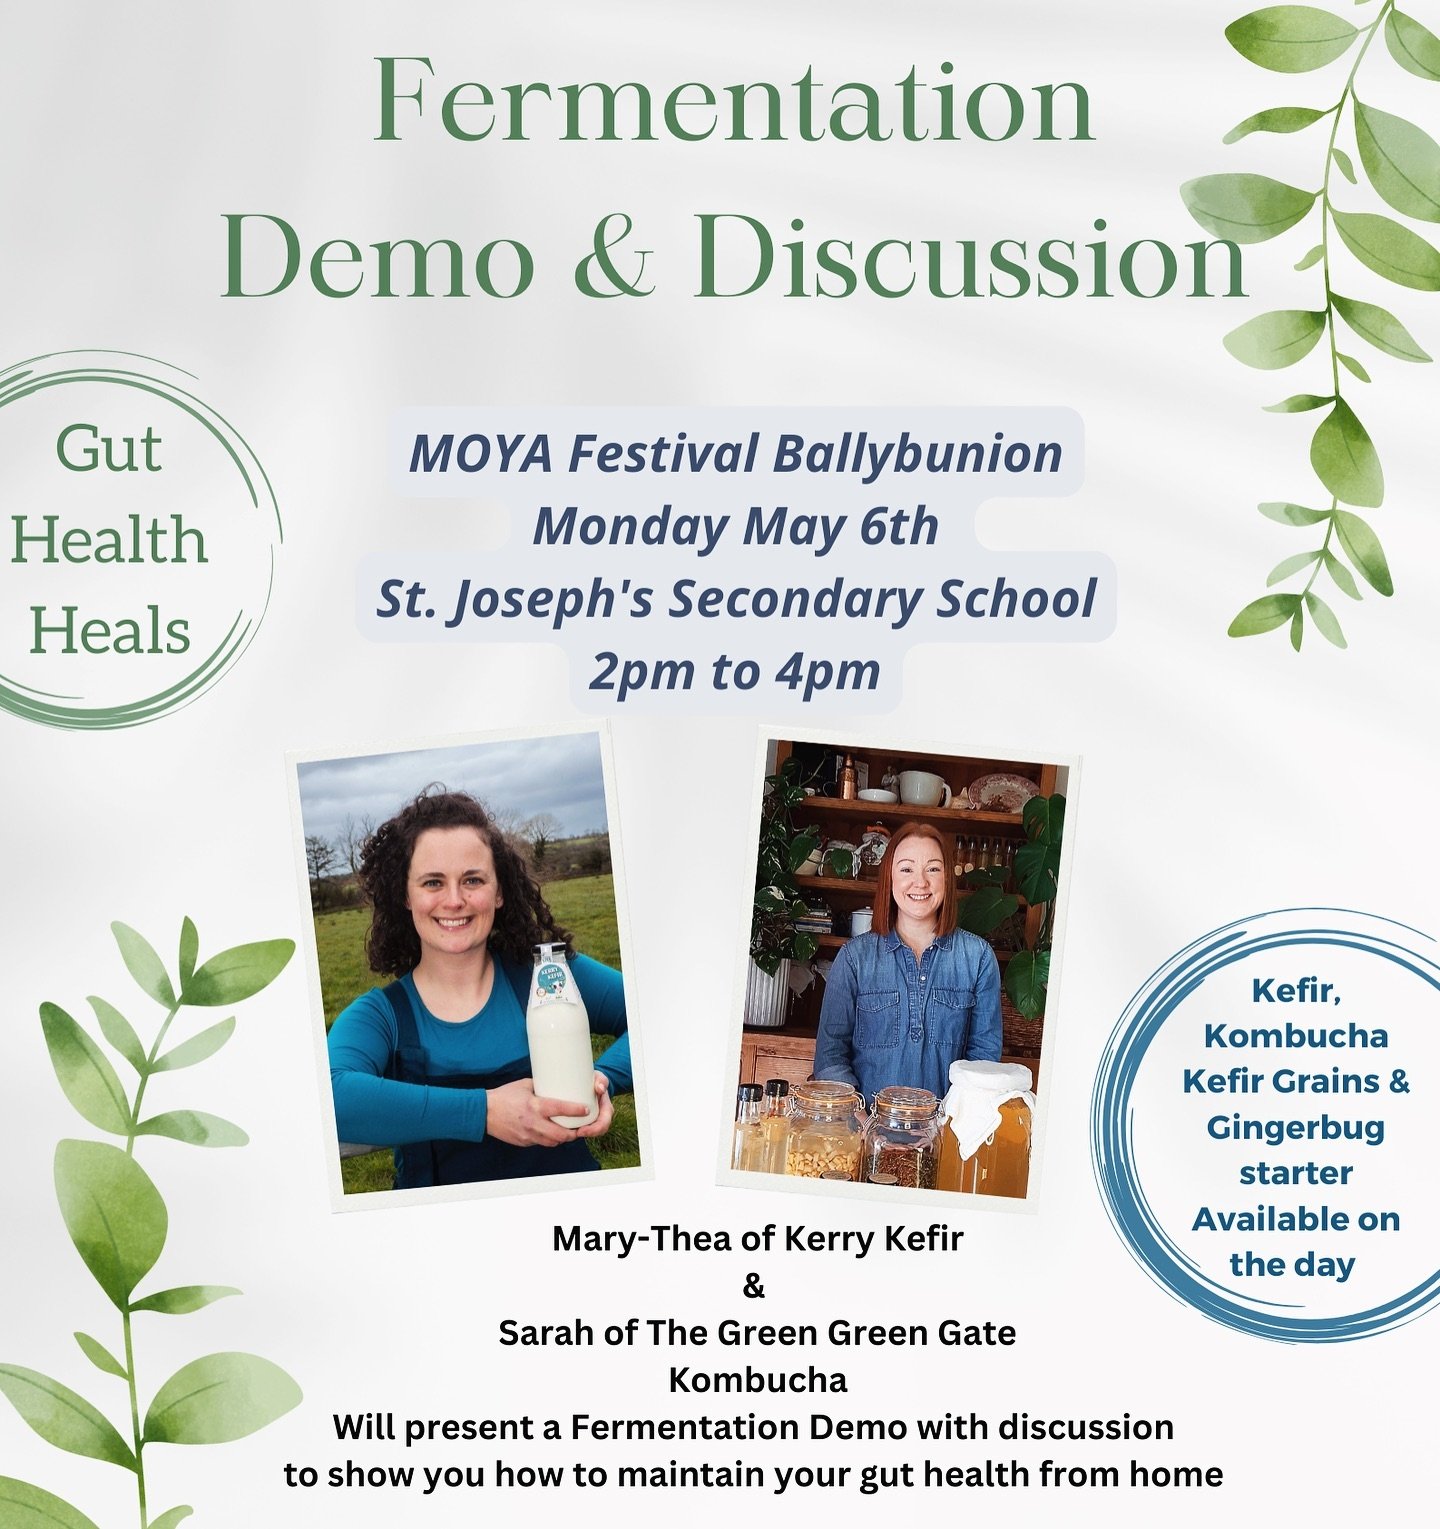 Gut Health &amp; Fermenting Discussion &amp; Demo with Mary-Thea Kerry Kefir &amp; Sarah Fitzgerald Green Green Gate 💚
@thegreengreengate 
@kerrykefir 
Bookings: www.moyaballybunion.ie
Monday 6 May 2024
14:00  16:00
St. Joseph&rsquo;s Secondary Scho